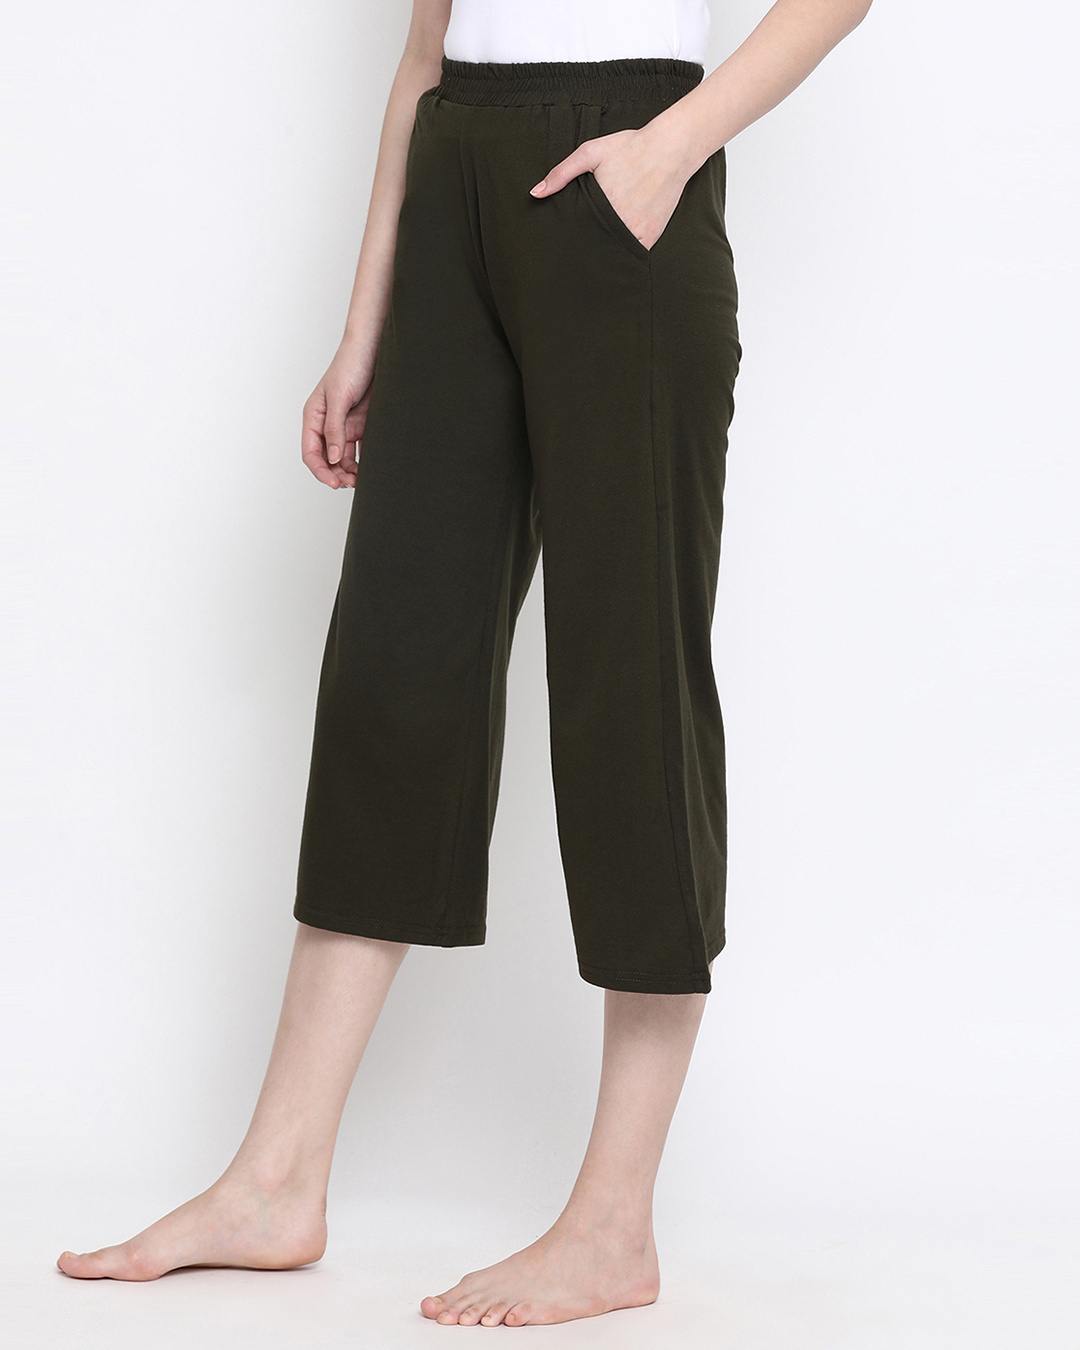 Shop Chic Basic Capri In Olive Green  Cotton Rich-Back